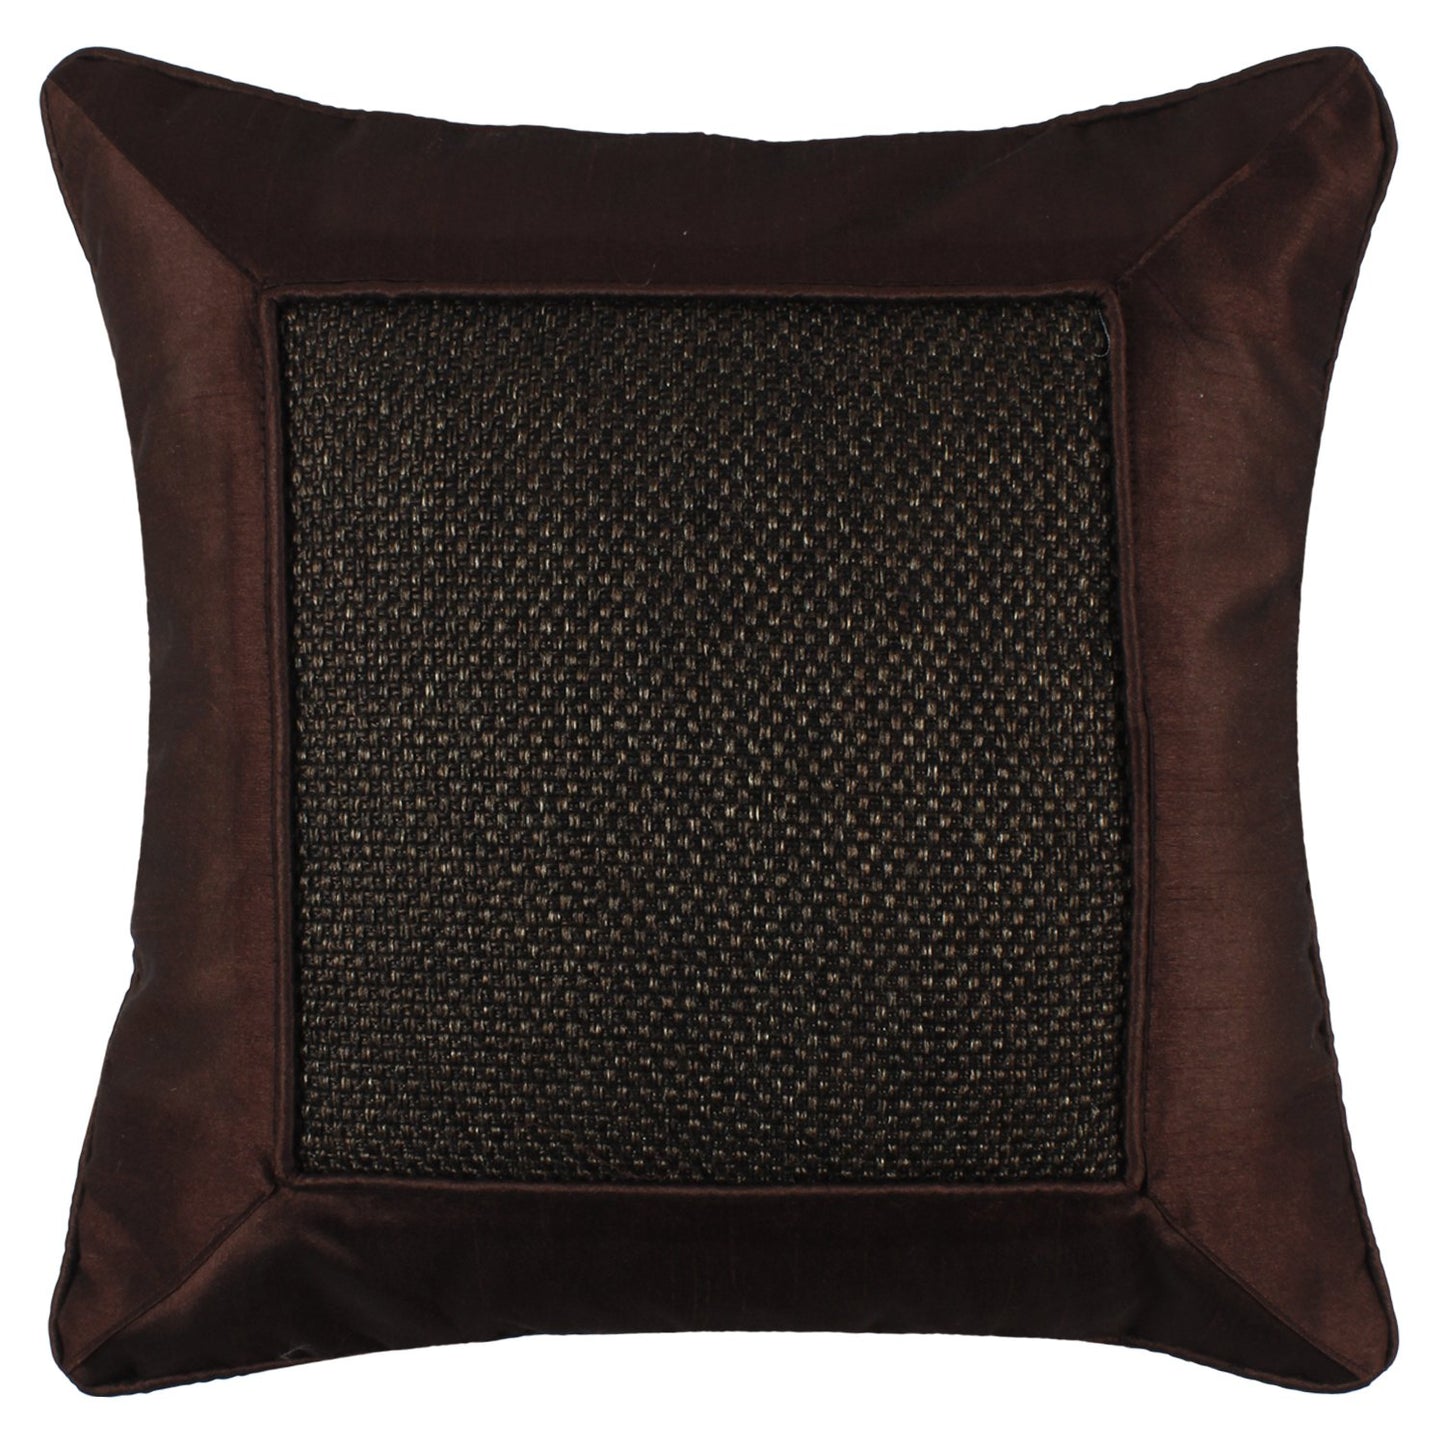 GOLDENIZE Throw Pillow Case Cushion Cover Home Decorative Solid Square Pillowcase, Thick, Luxury with Invisible Zipper for Sofa (16 x 16 Inches, Brown Jute)